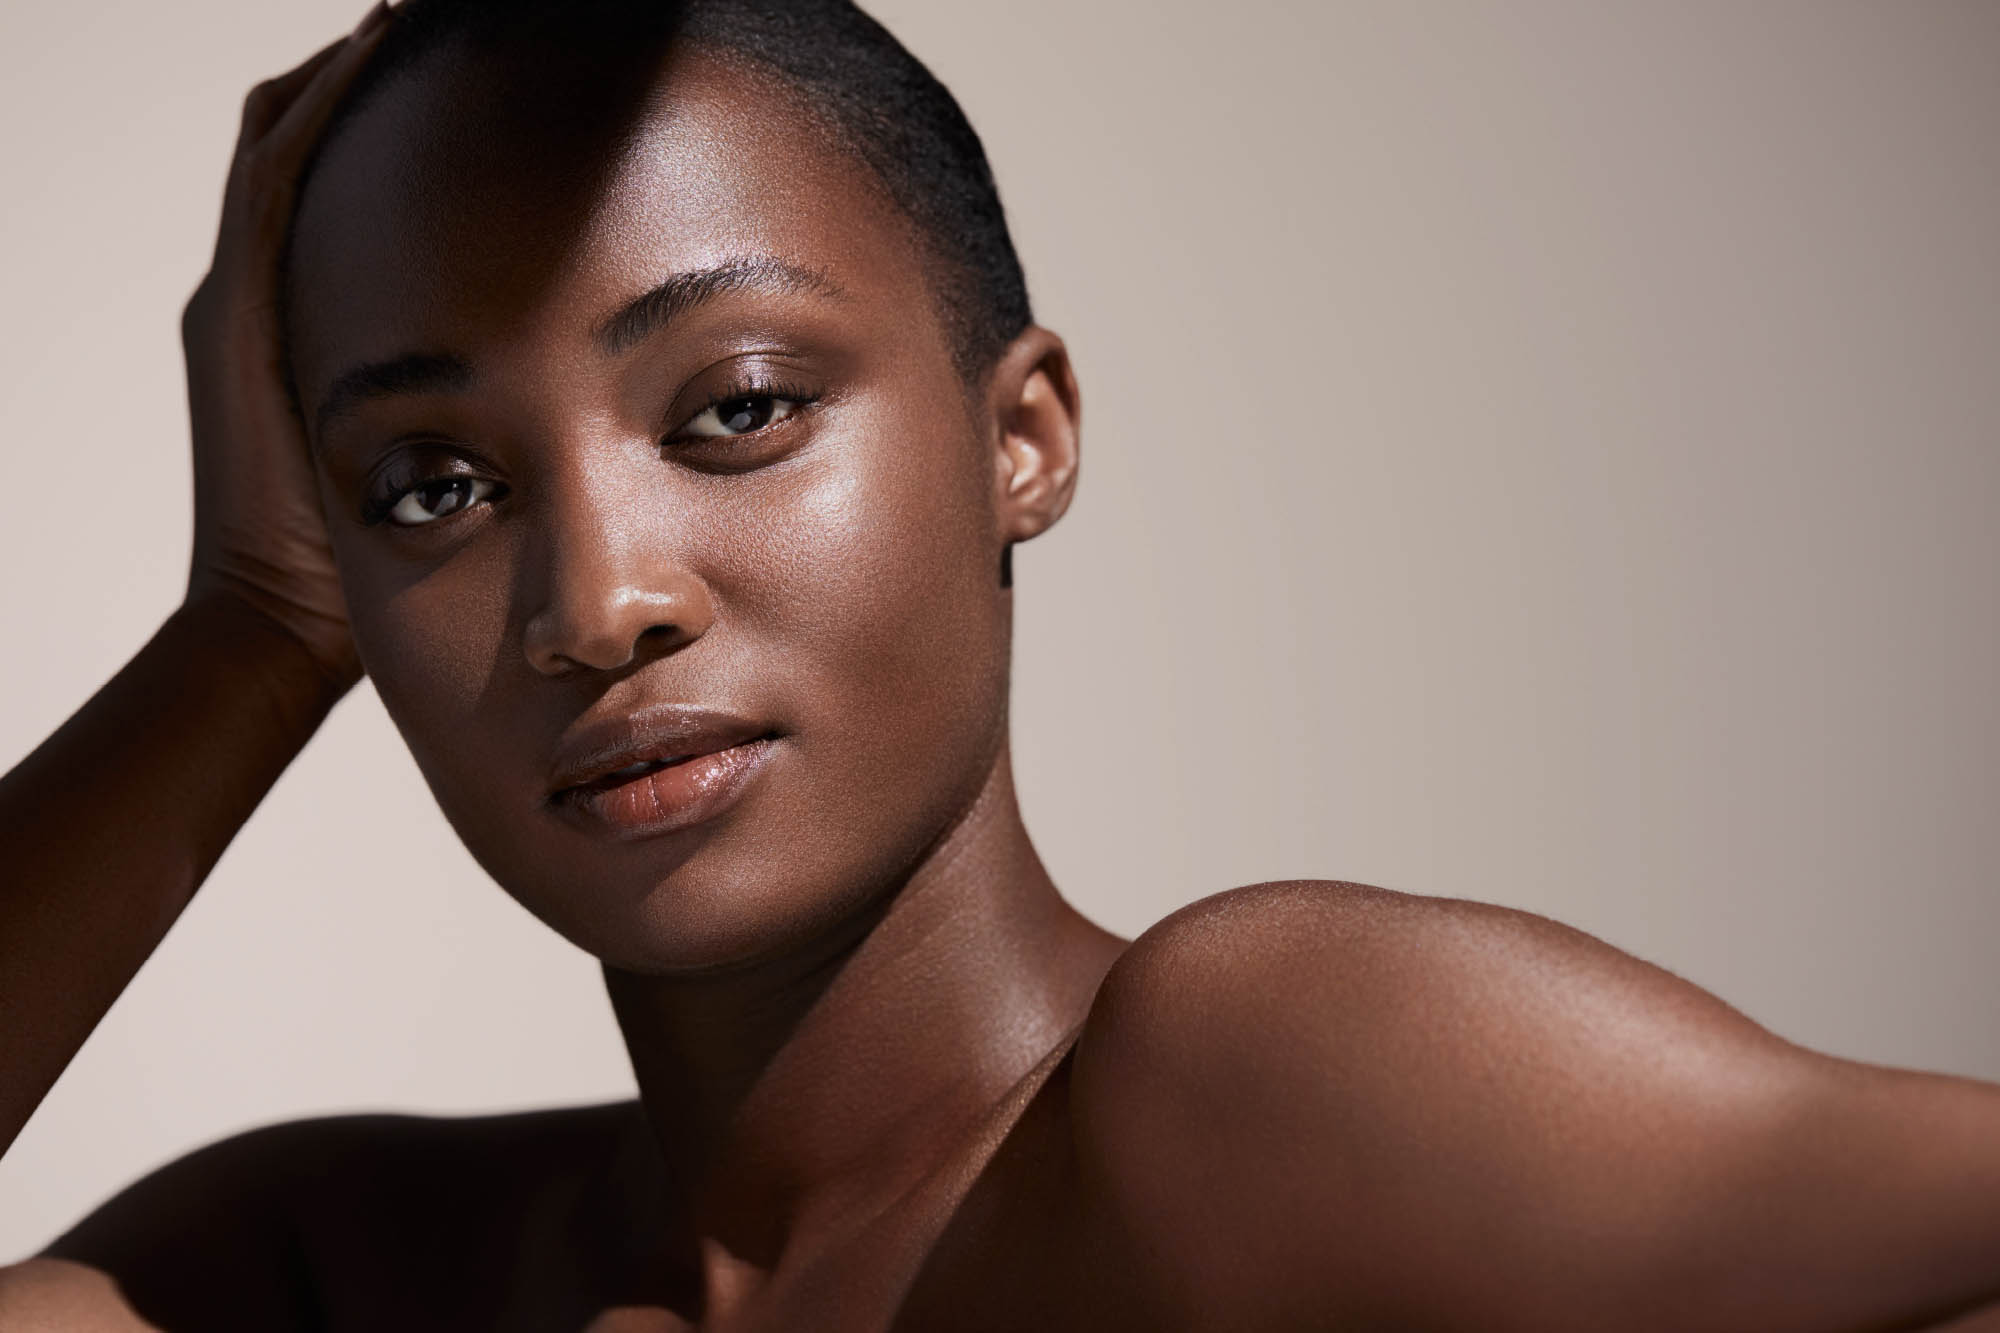 Photo of a female model with glowing skin